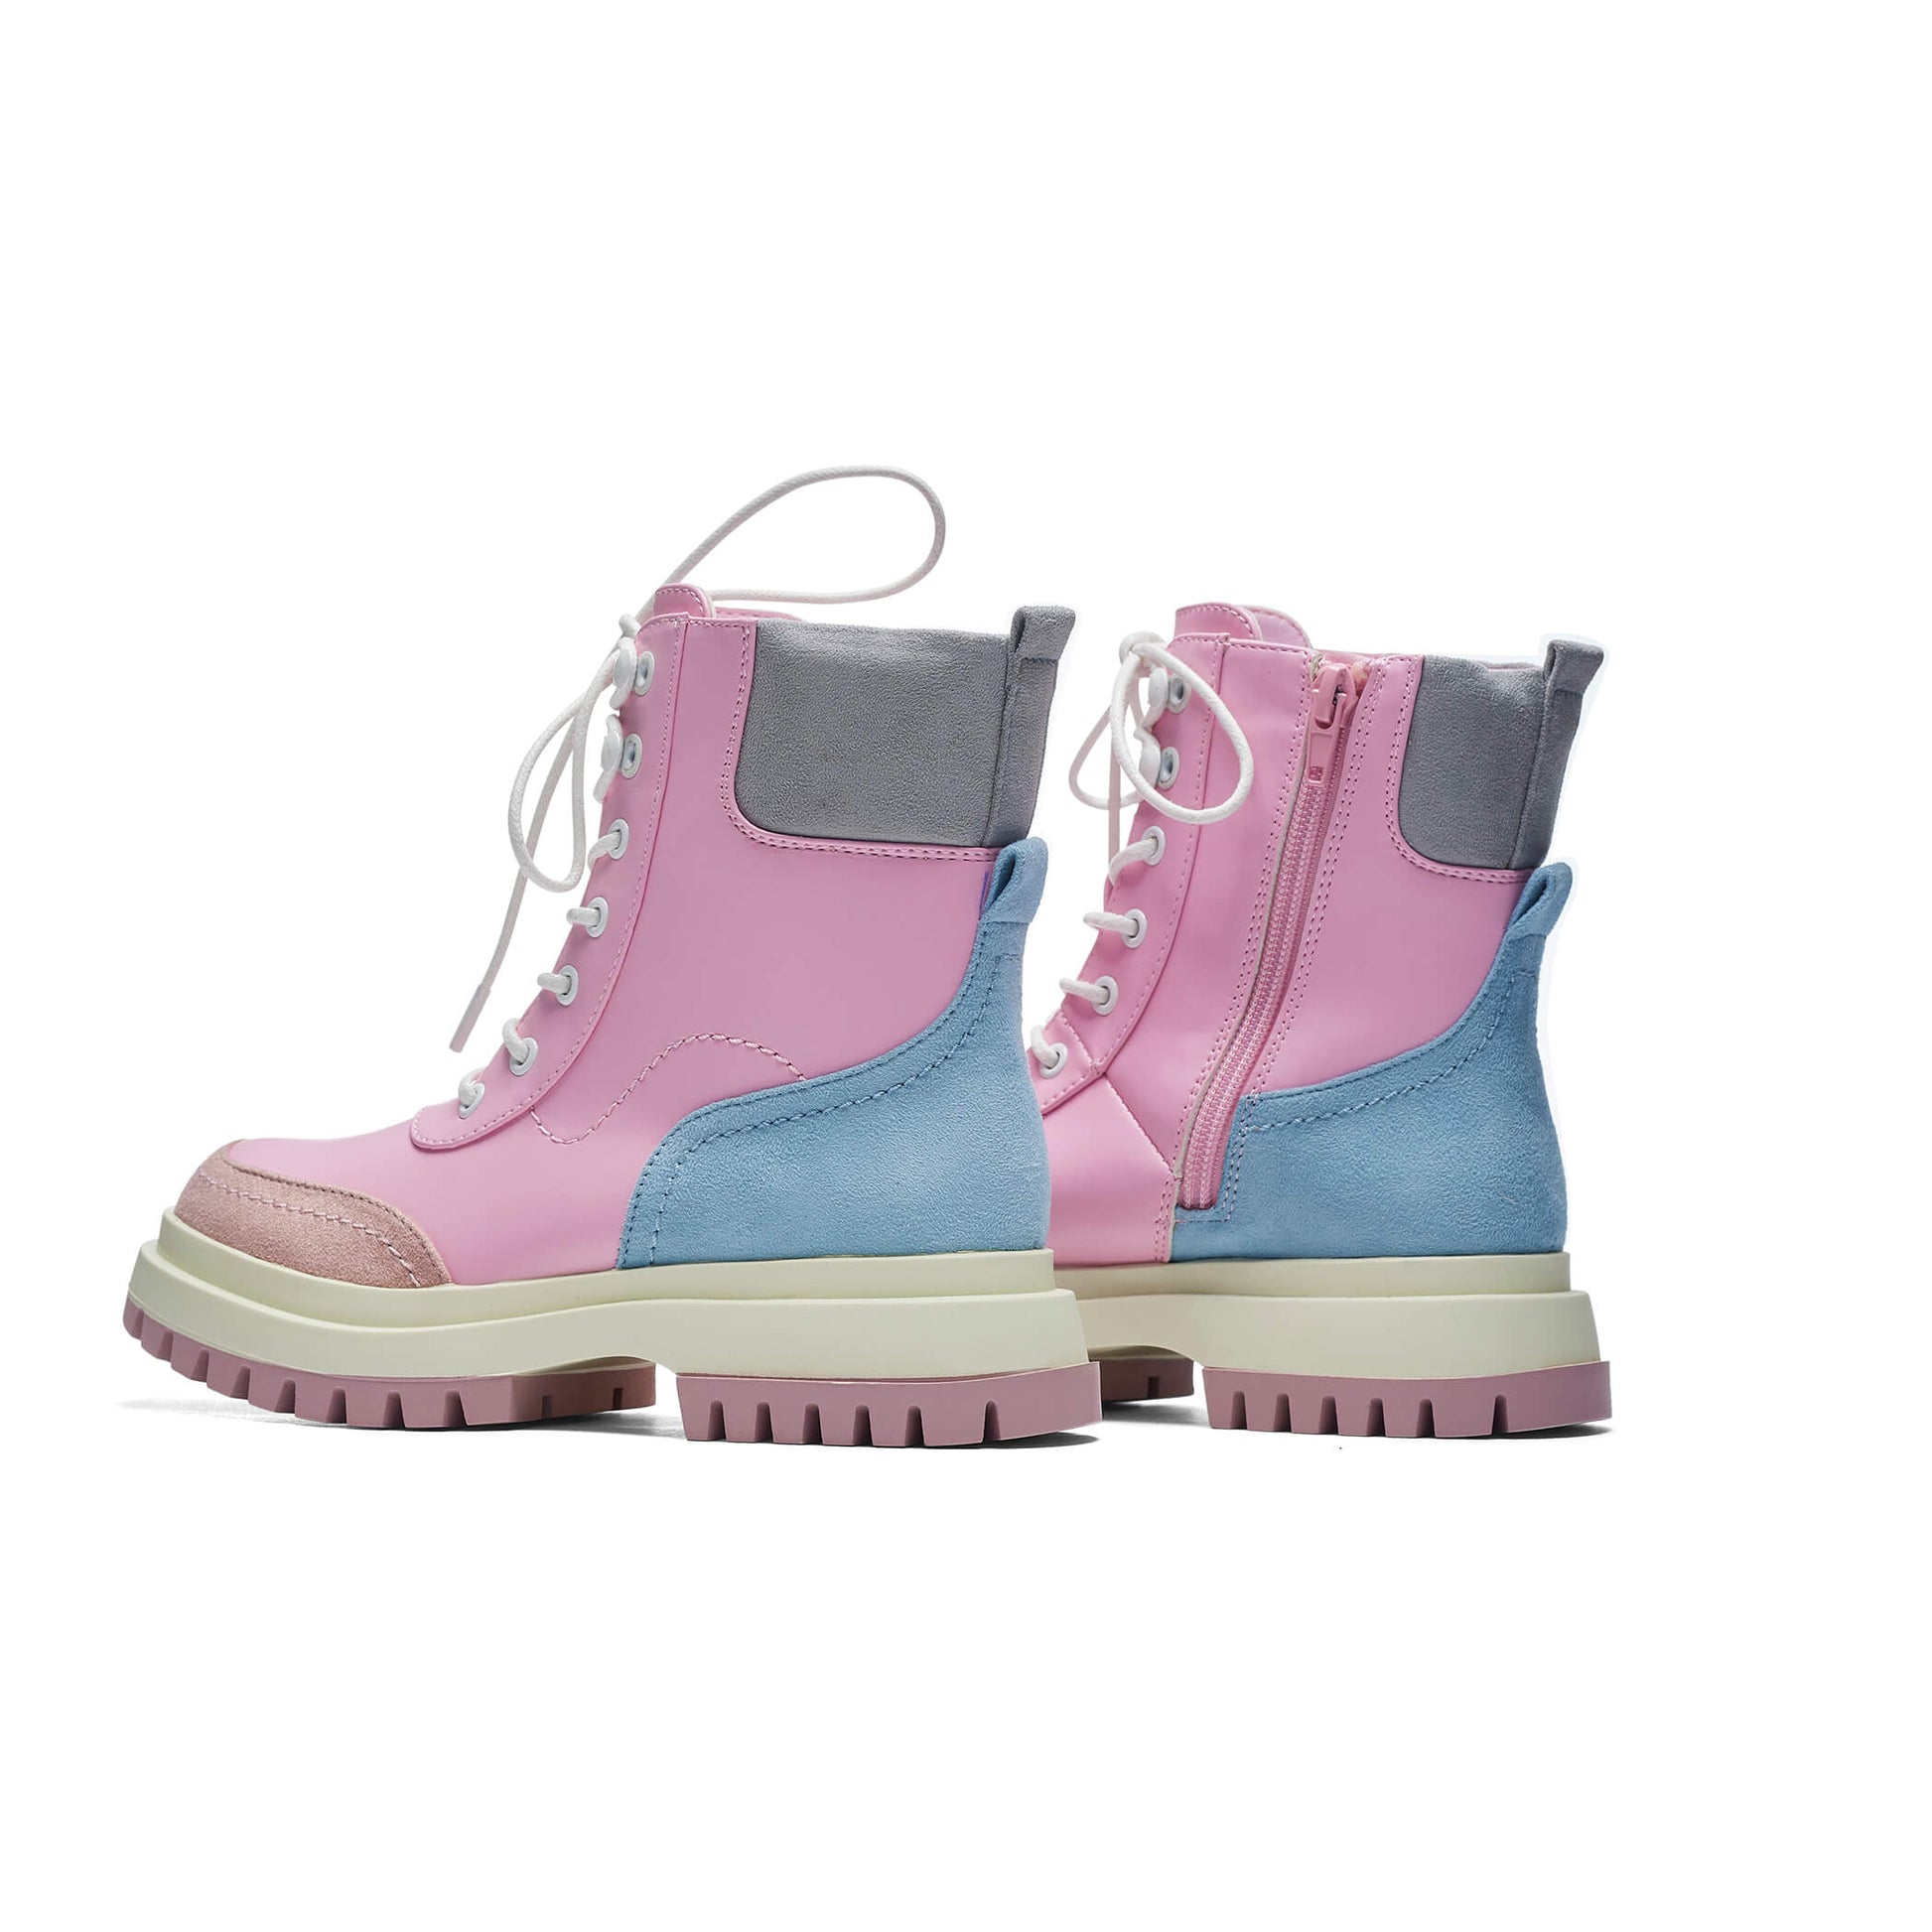 Lil’ Hydra Kawaii Boots - Ankle Boots - KOI Footwear - Pink - Back Side View